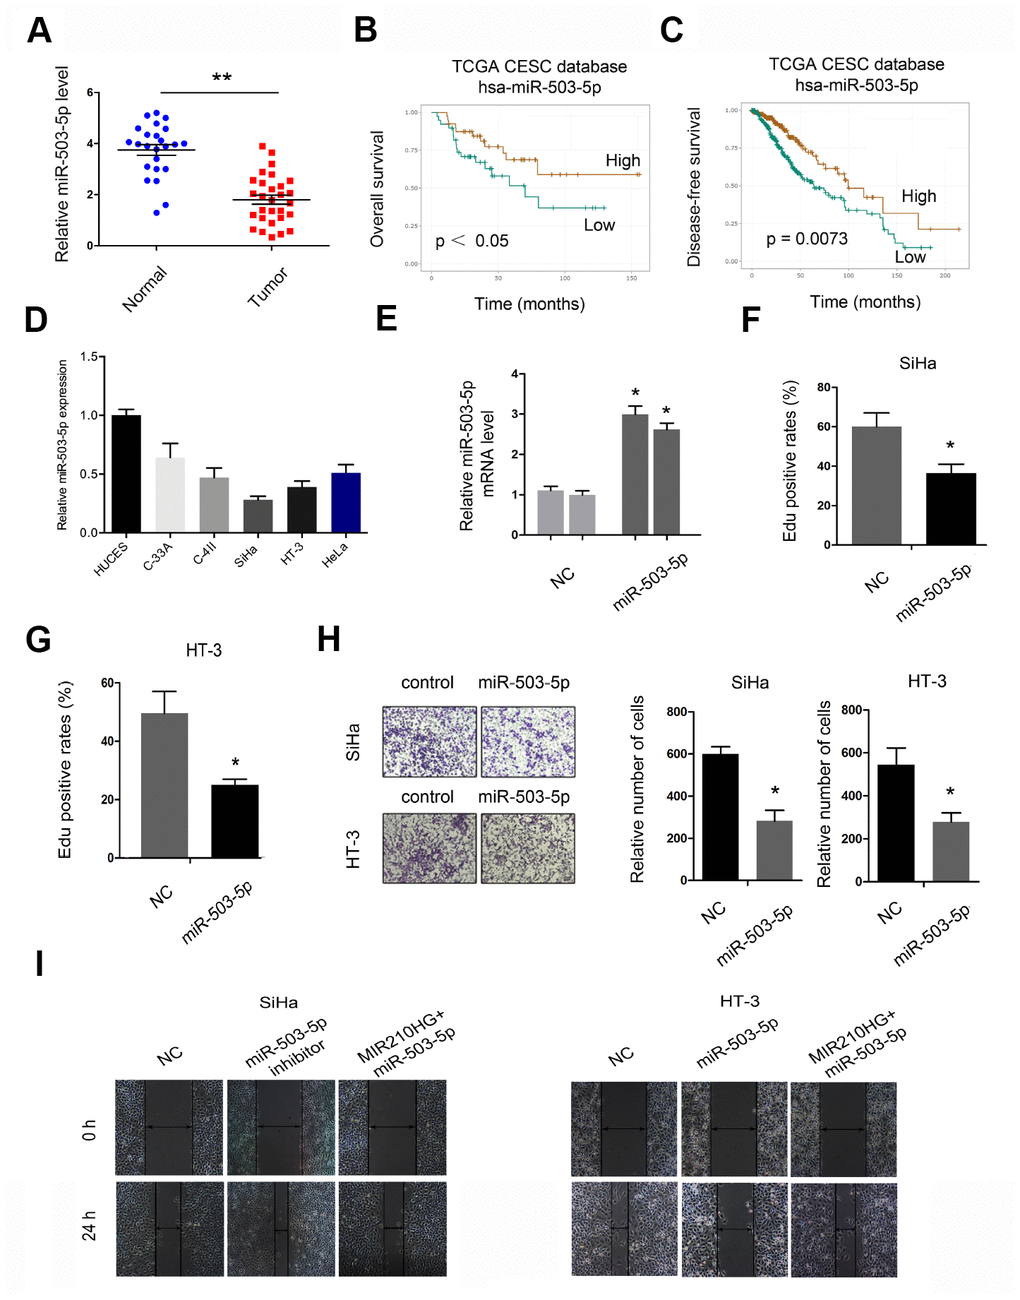 The roles of miR-503-5p in CC progression. (A, D) MiR-503-5p expression was downregulated in CC tissues and cell lines. (B, C) Low miR-503-5p expression was associated with poor overall survival and disease-free survival in CC patients. (E) The overexpression efficiency of miR-503-5p was confirmed by qRT-PCR. (F, G) MiR-503-5p mimics reduced CC cell proliferation abilities. (H) MiR-503-5p mimics reduced CC cell invasion abilities. (I) MiR-503-5p mimics abolished the effects of MIR210HG on CC cell migration abilities. *P